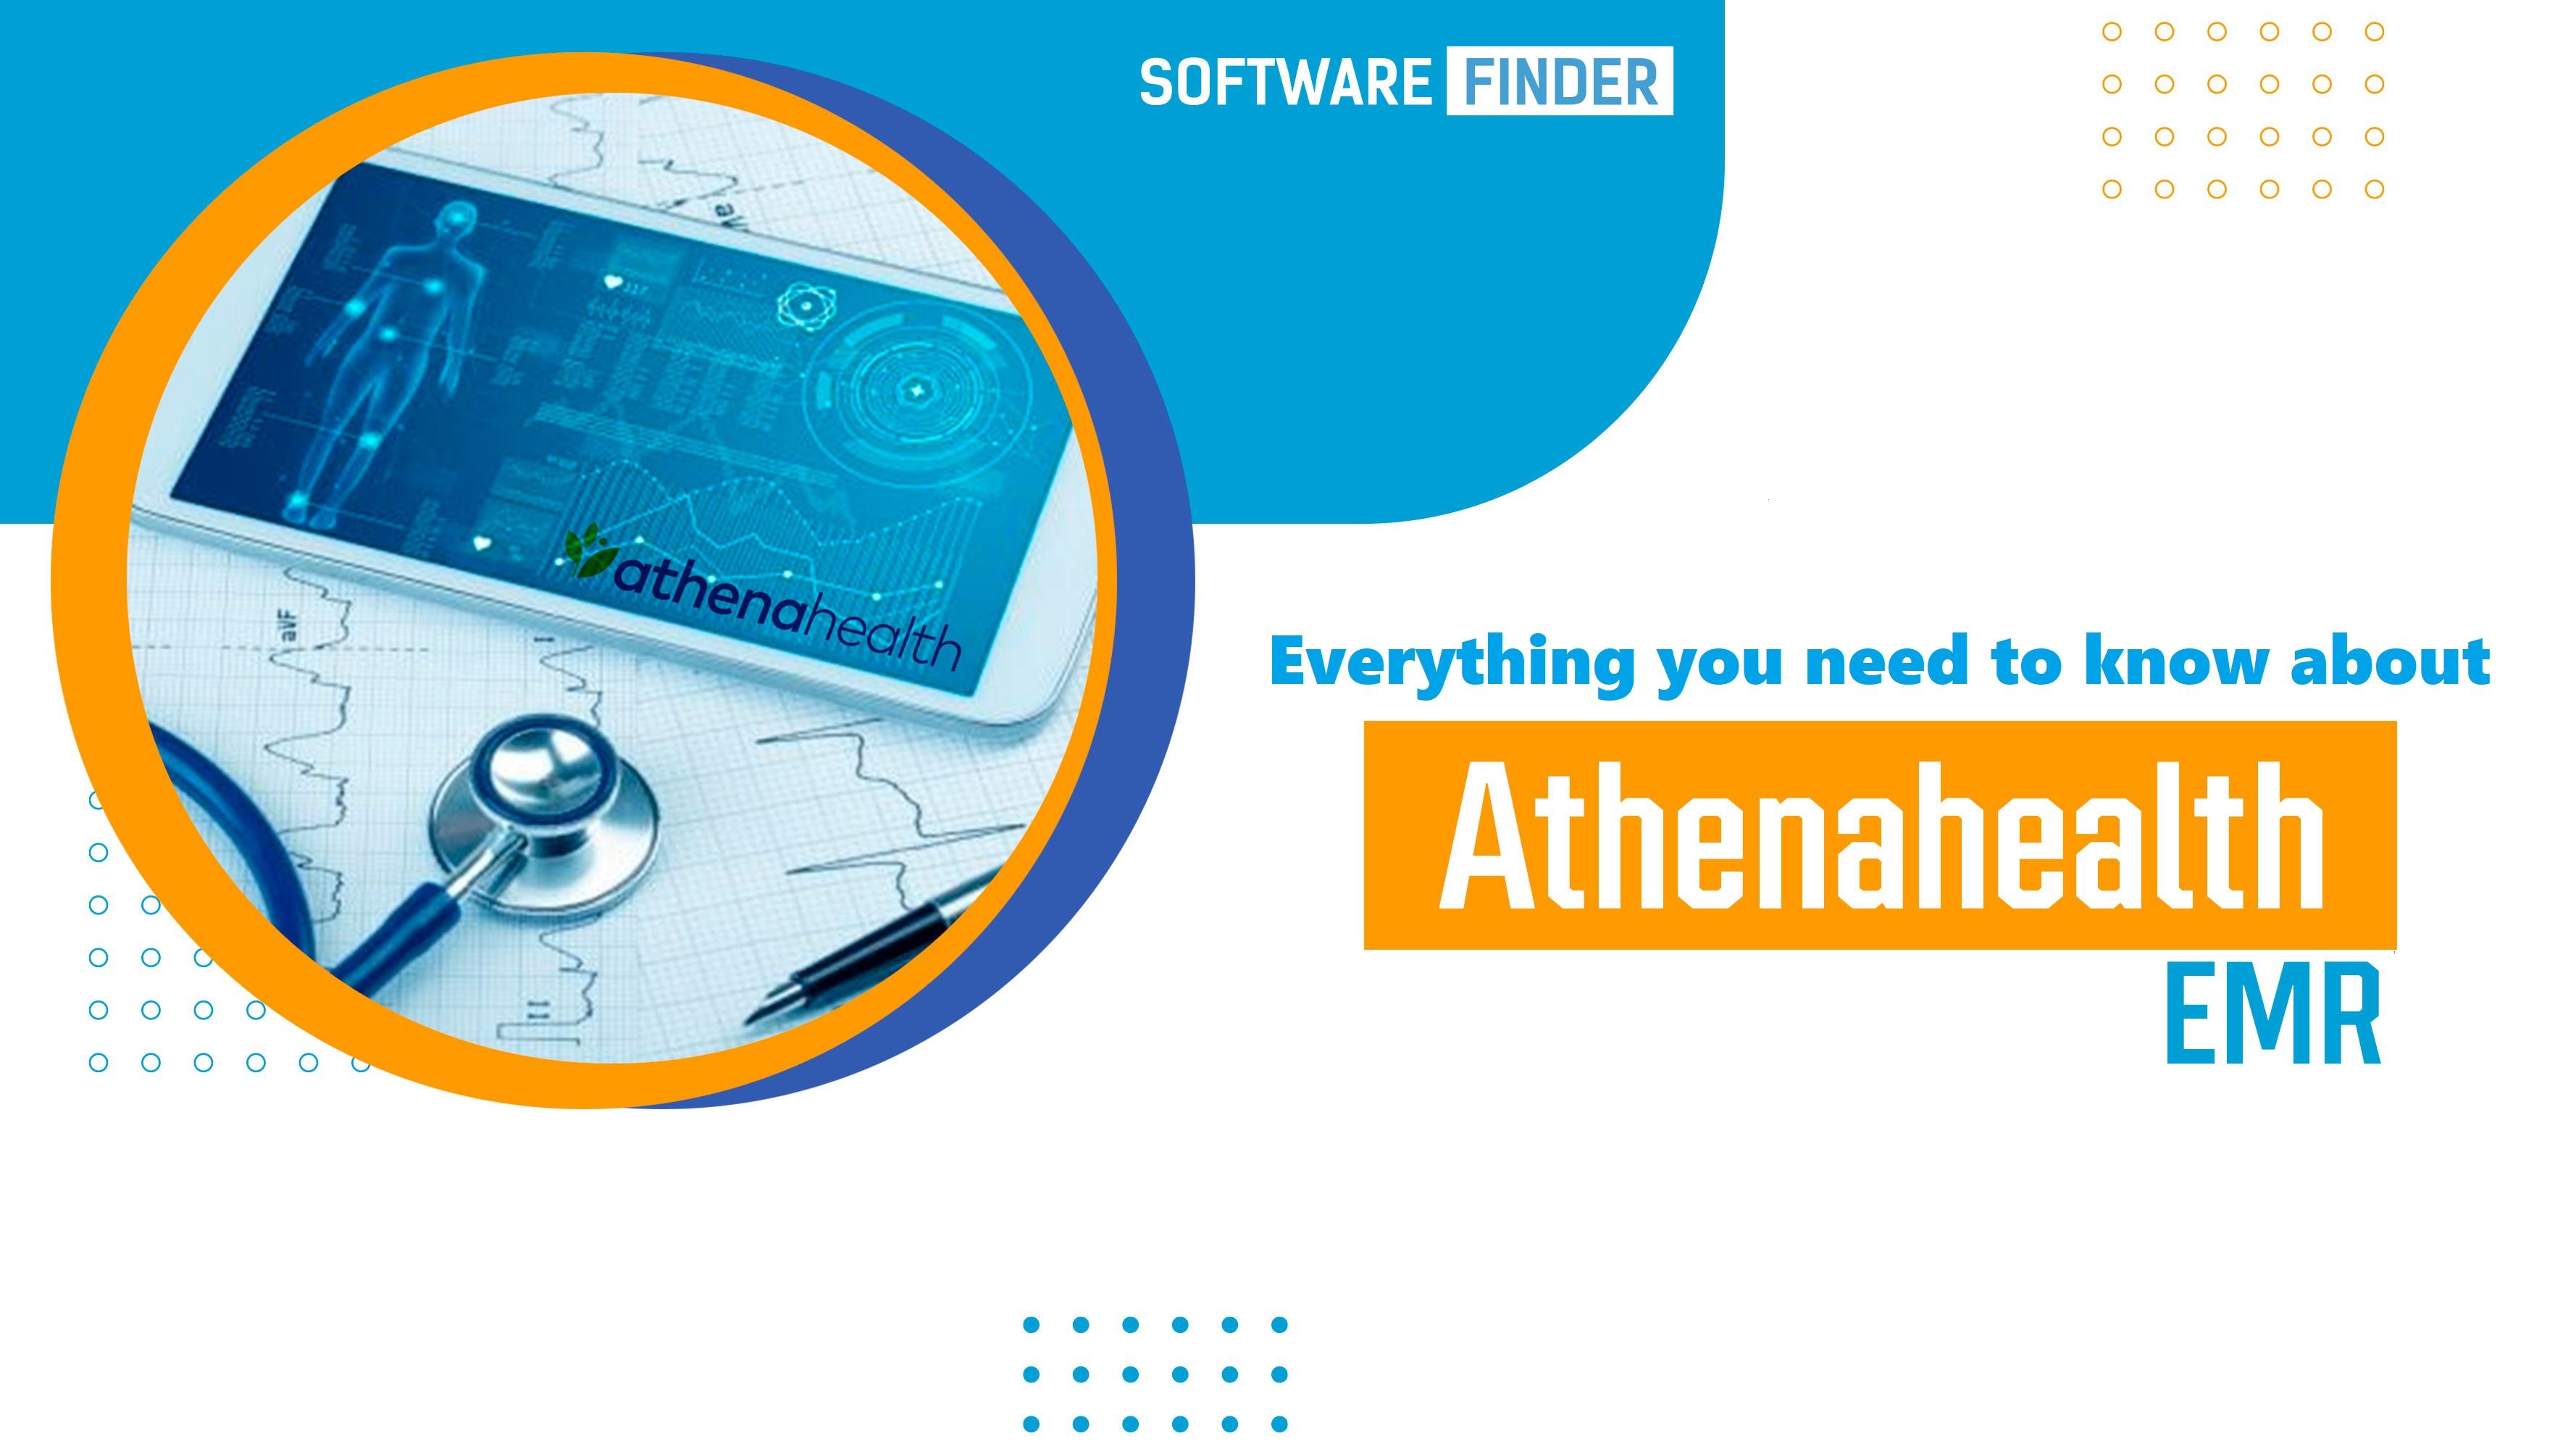 Everything you need to know about Athenahealth EHR